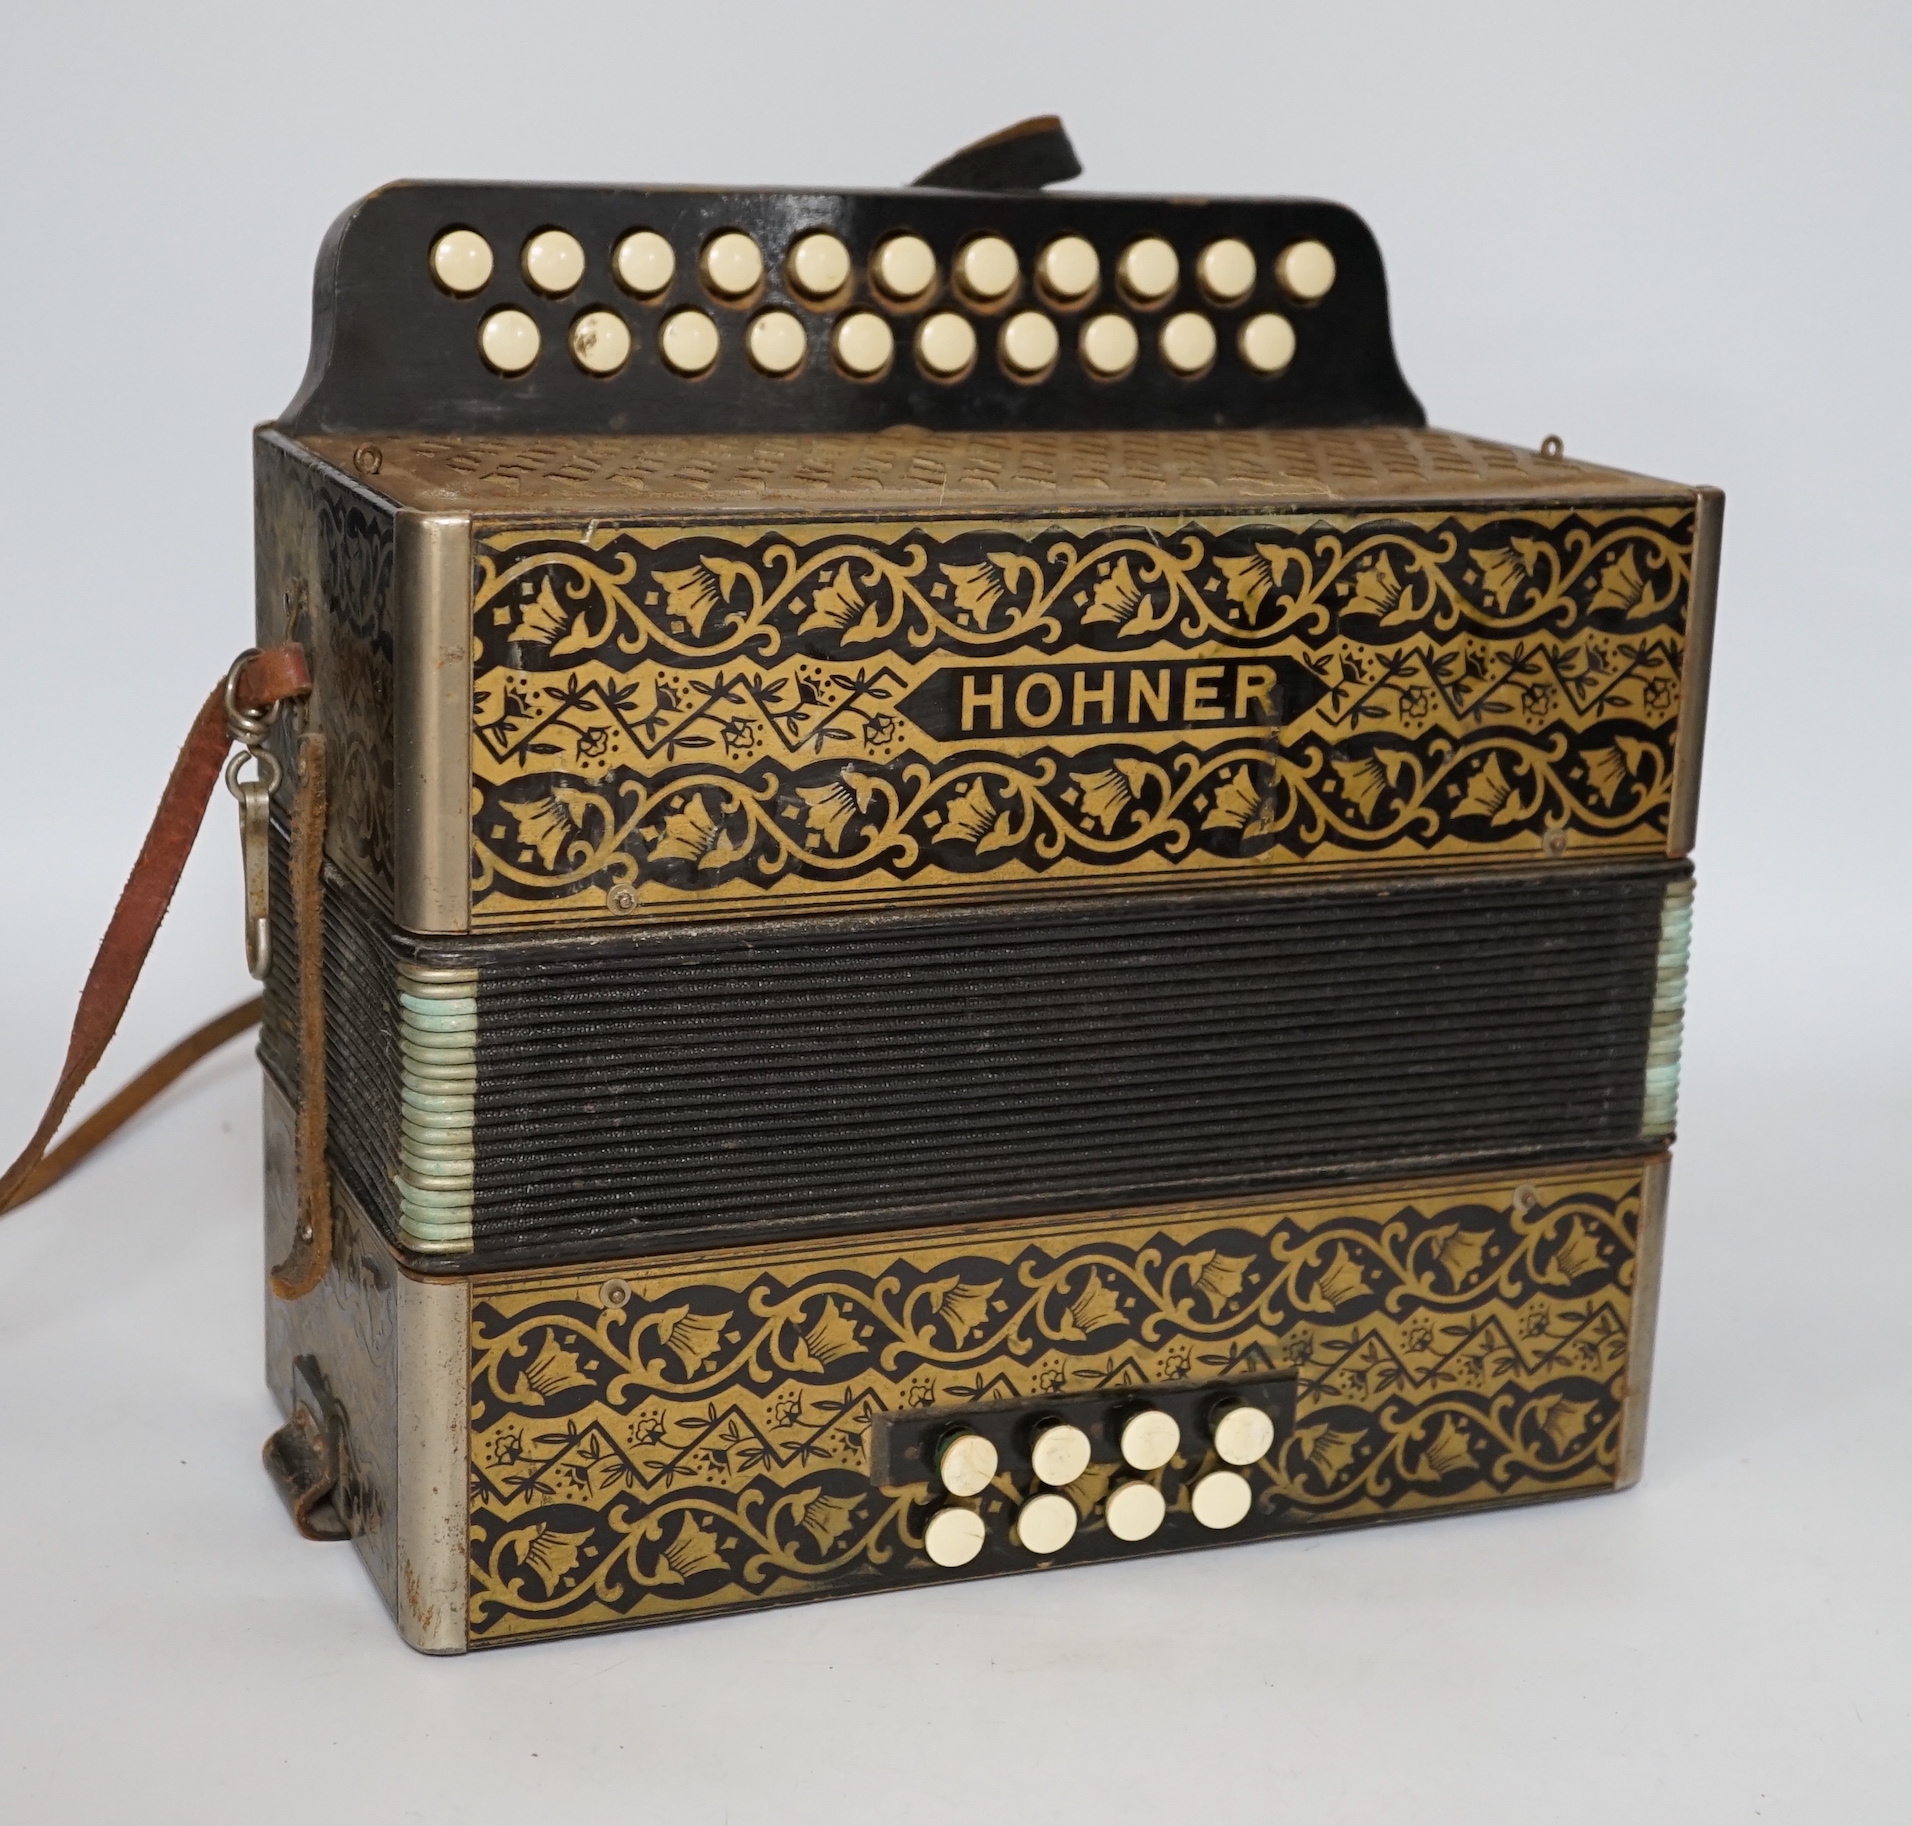 A Hohner accordion with Bakelite buttons